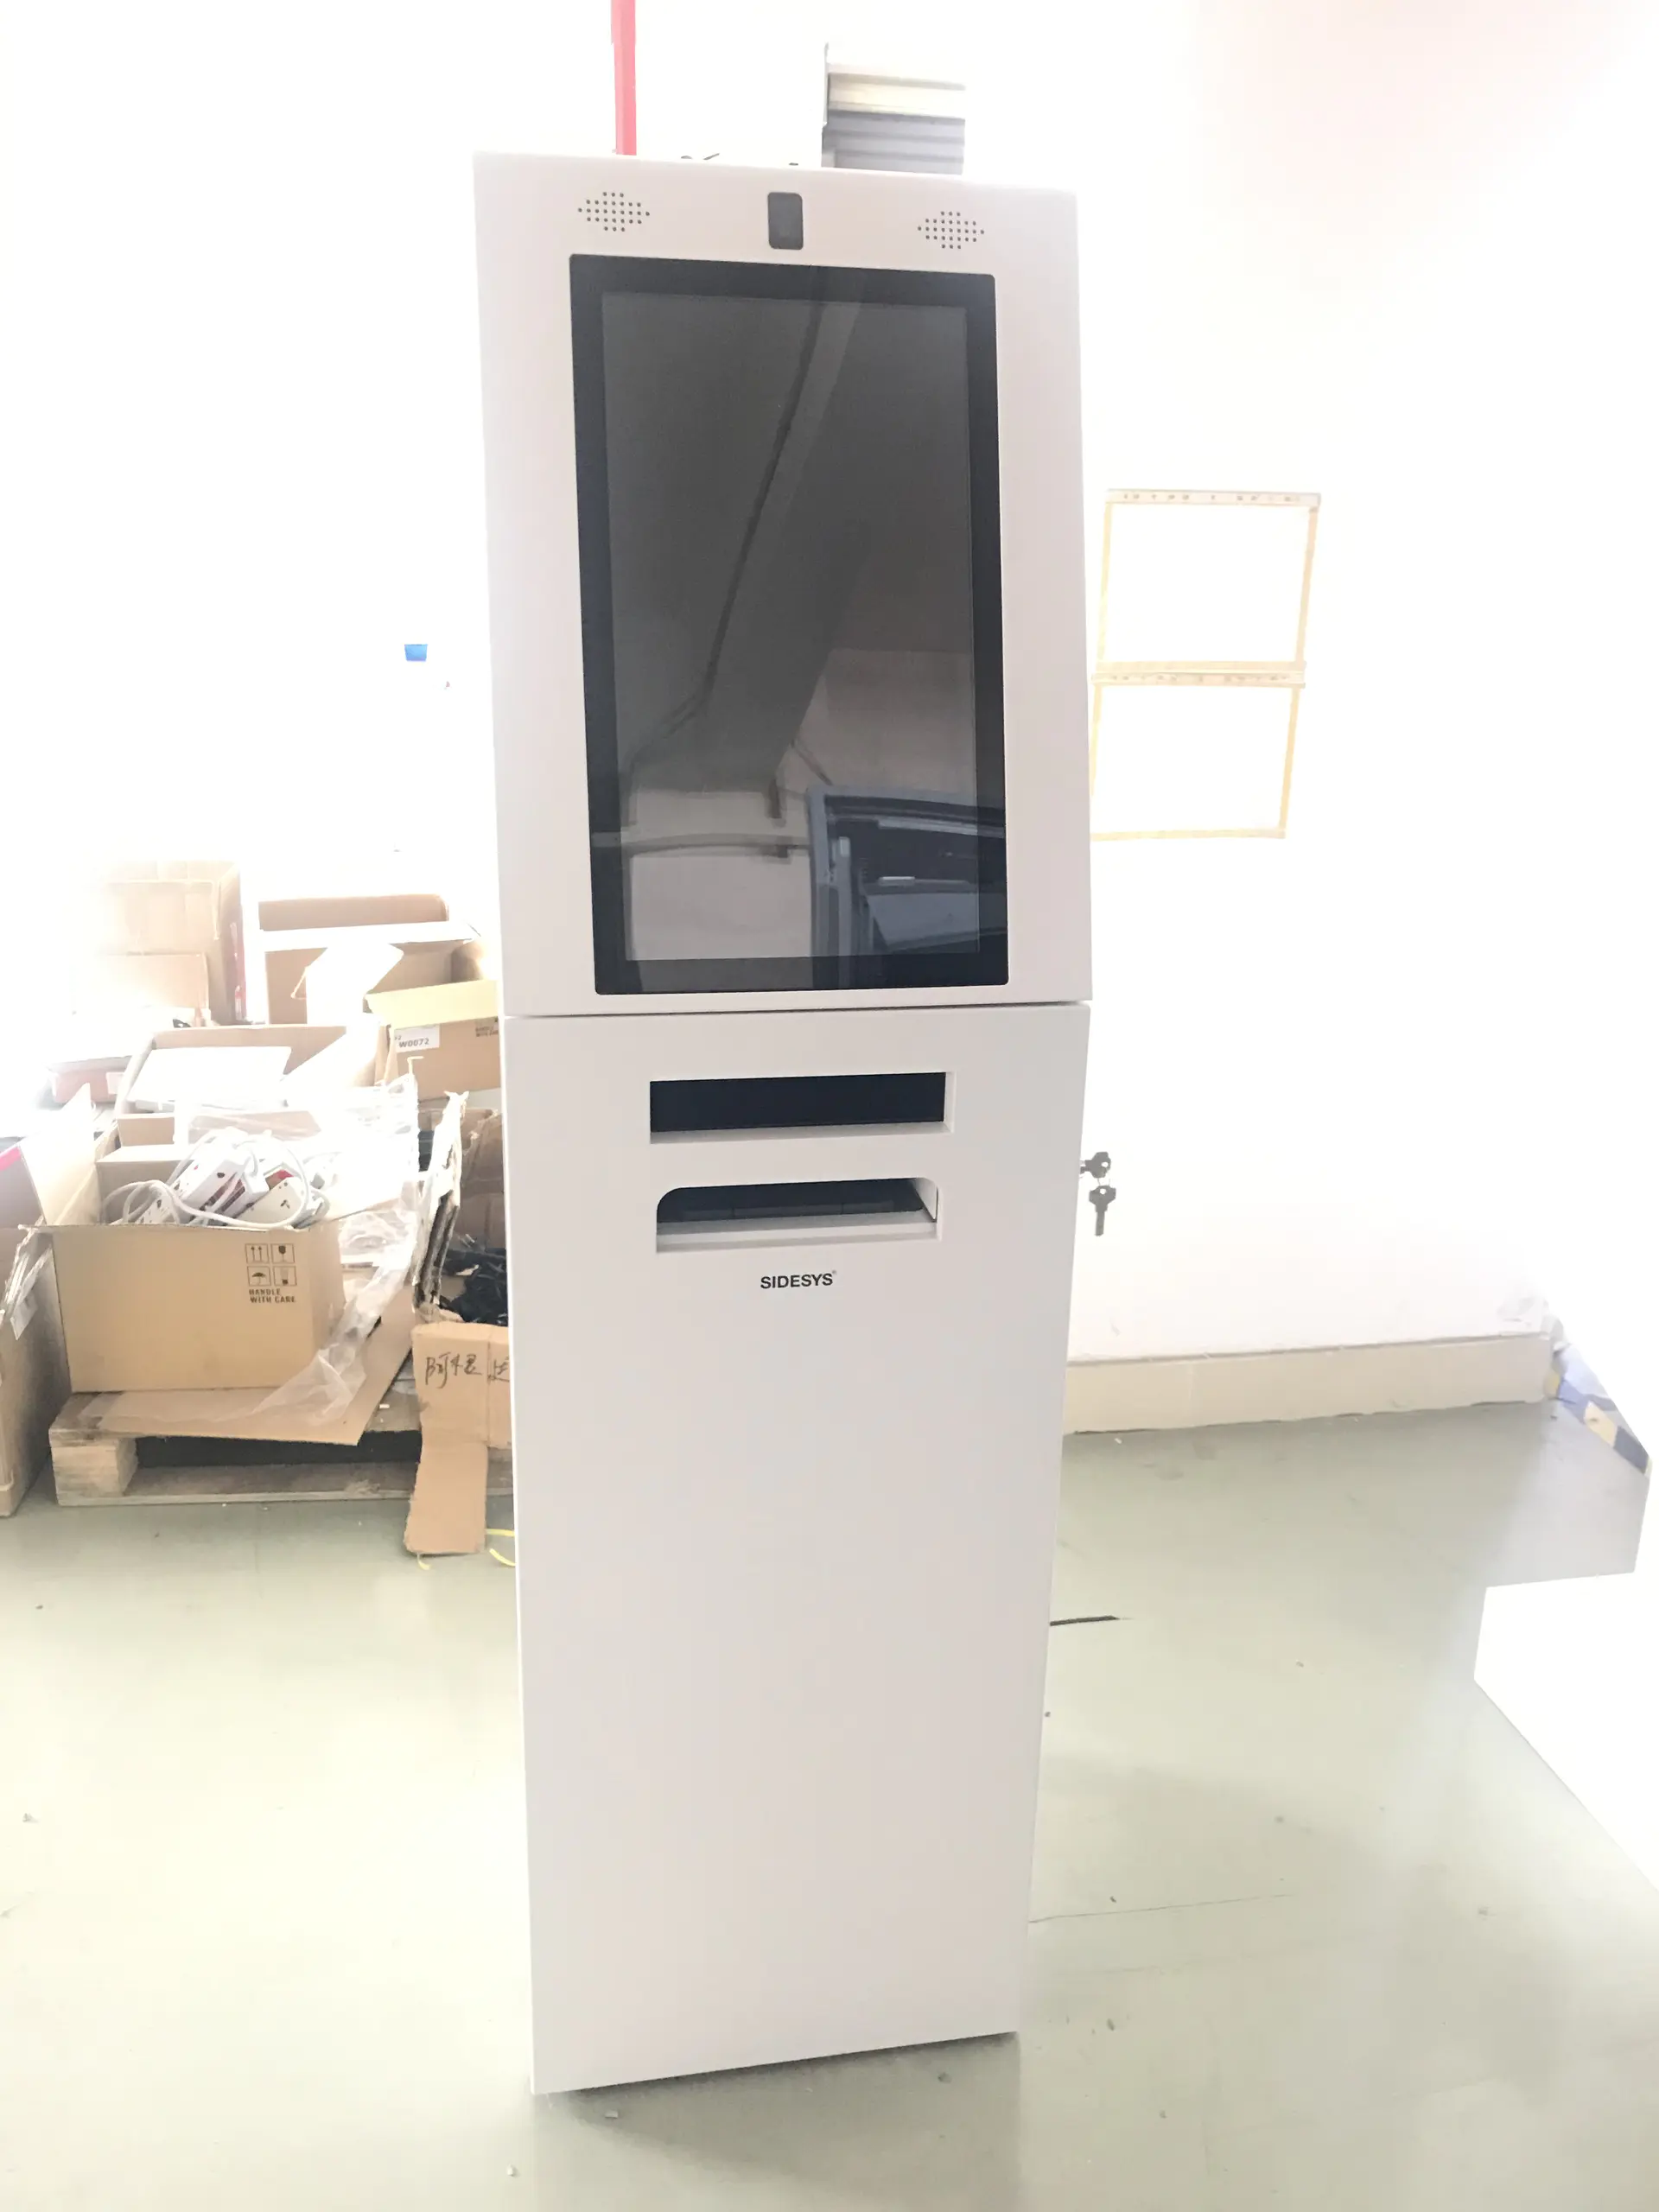 Self serviceA4 printer kiosk with document scanner and camera